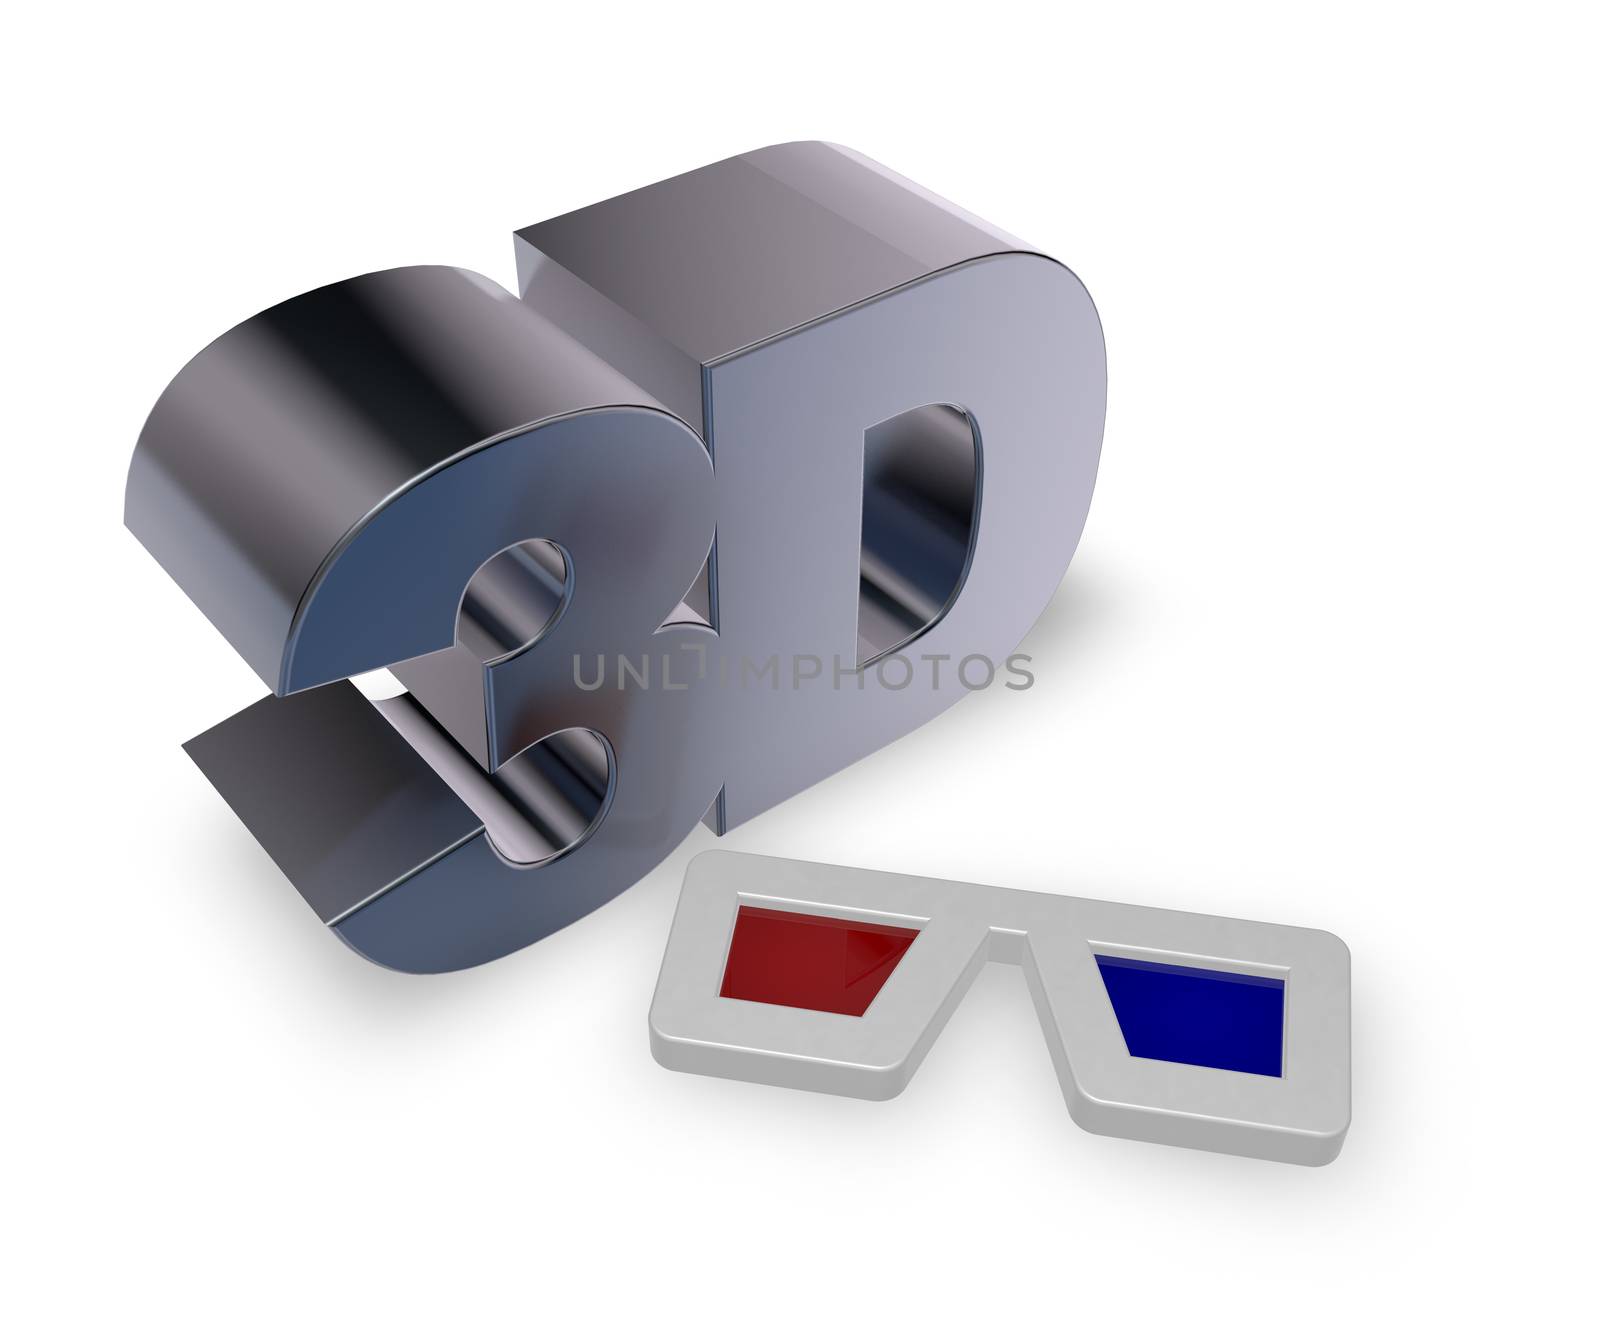 metal 3d tag and glasses on white background - 3d illustration